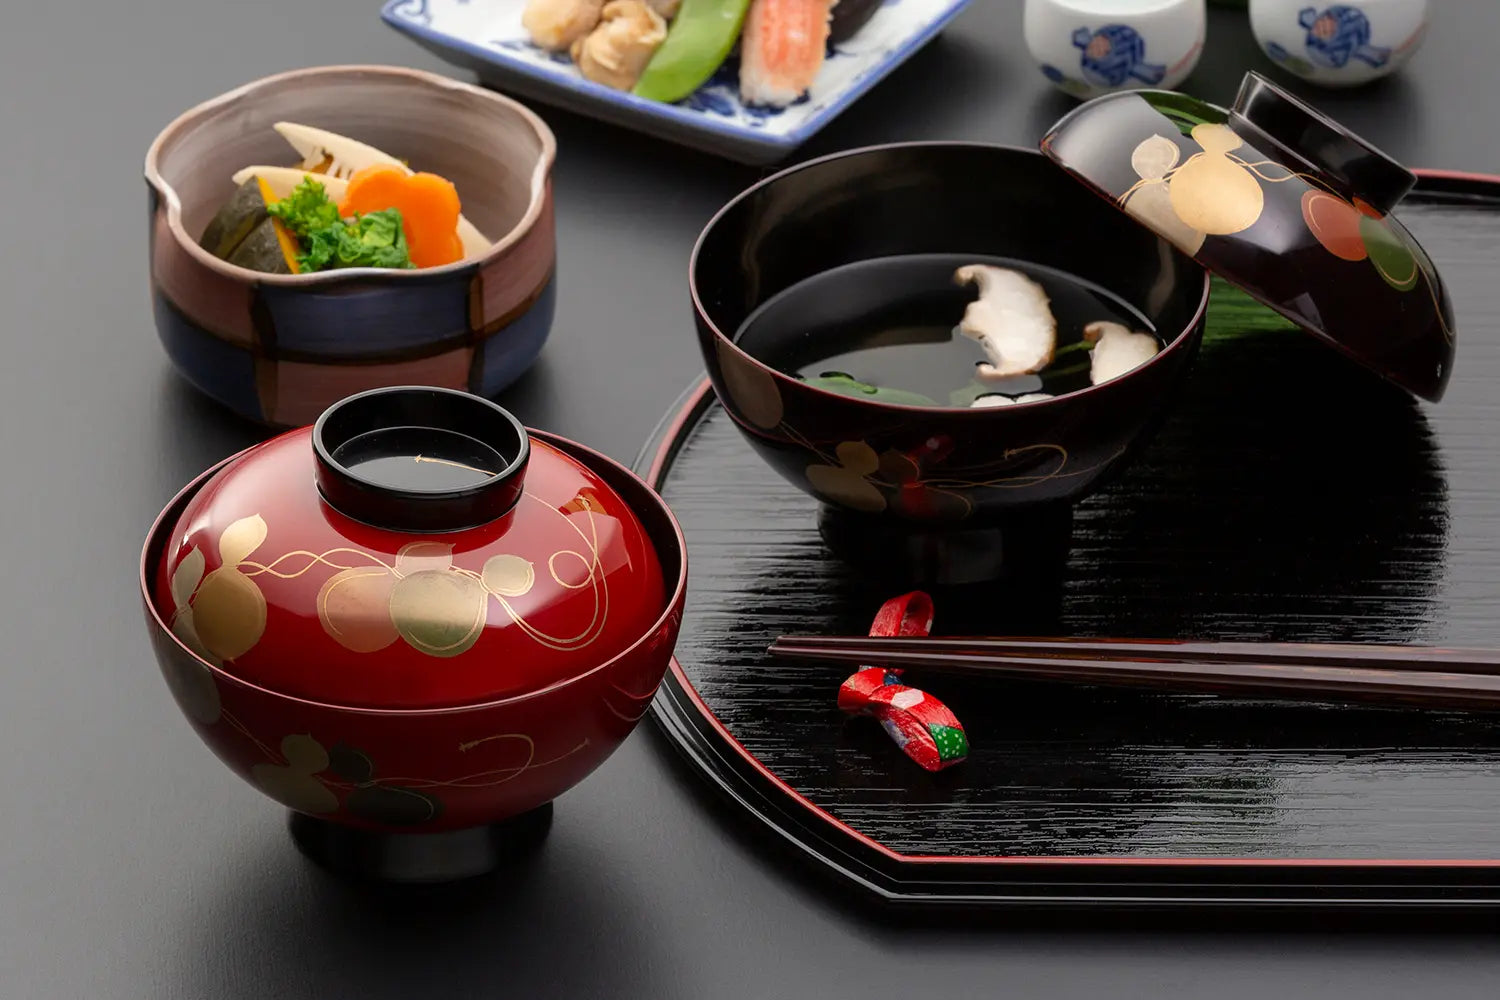 You can create an elegant Japanese style table with foods served on gorgeous lacquerware dishes, created by one of Japan's proud art crafts.